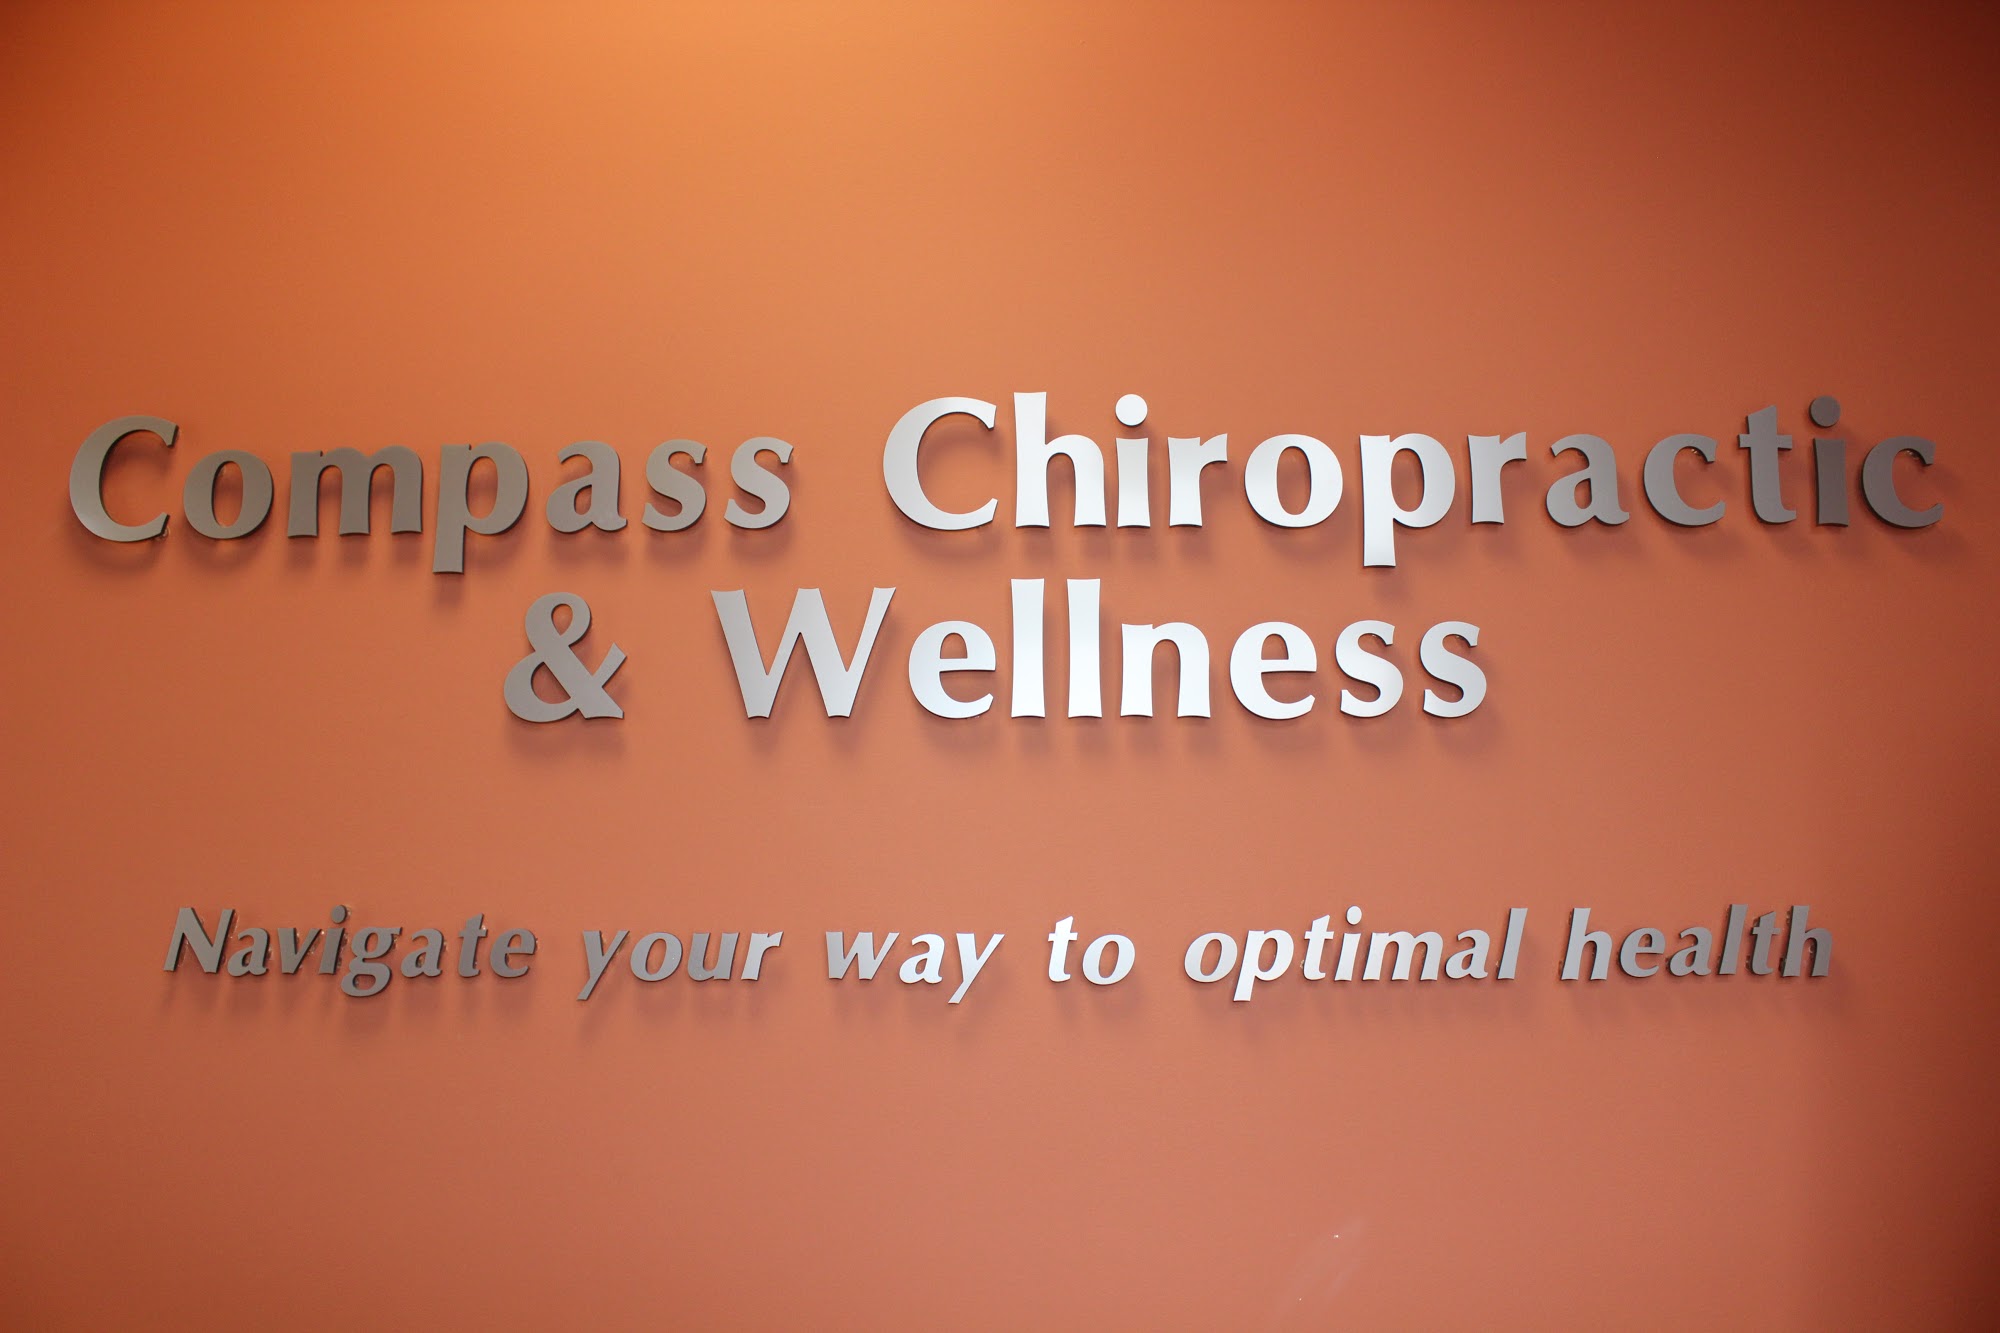 Compass Chiropractic and Wellness